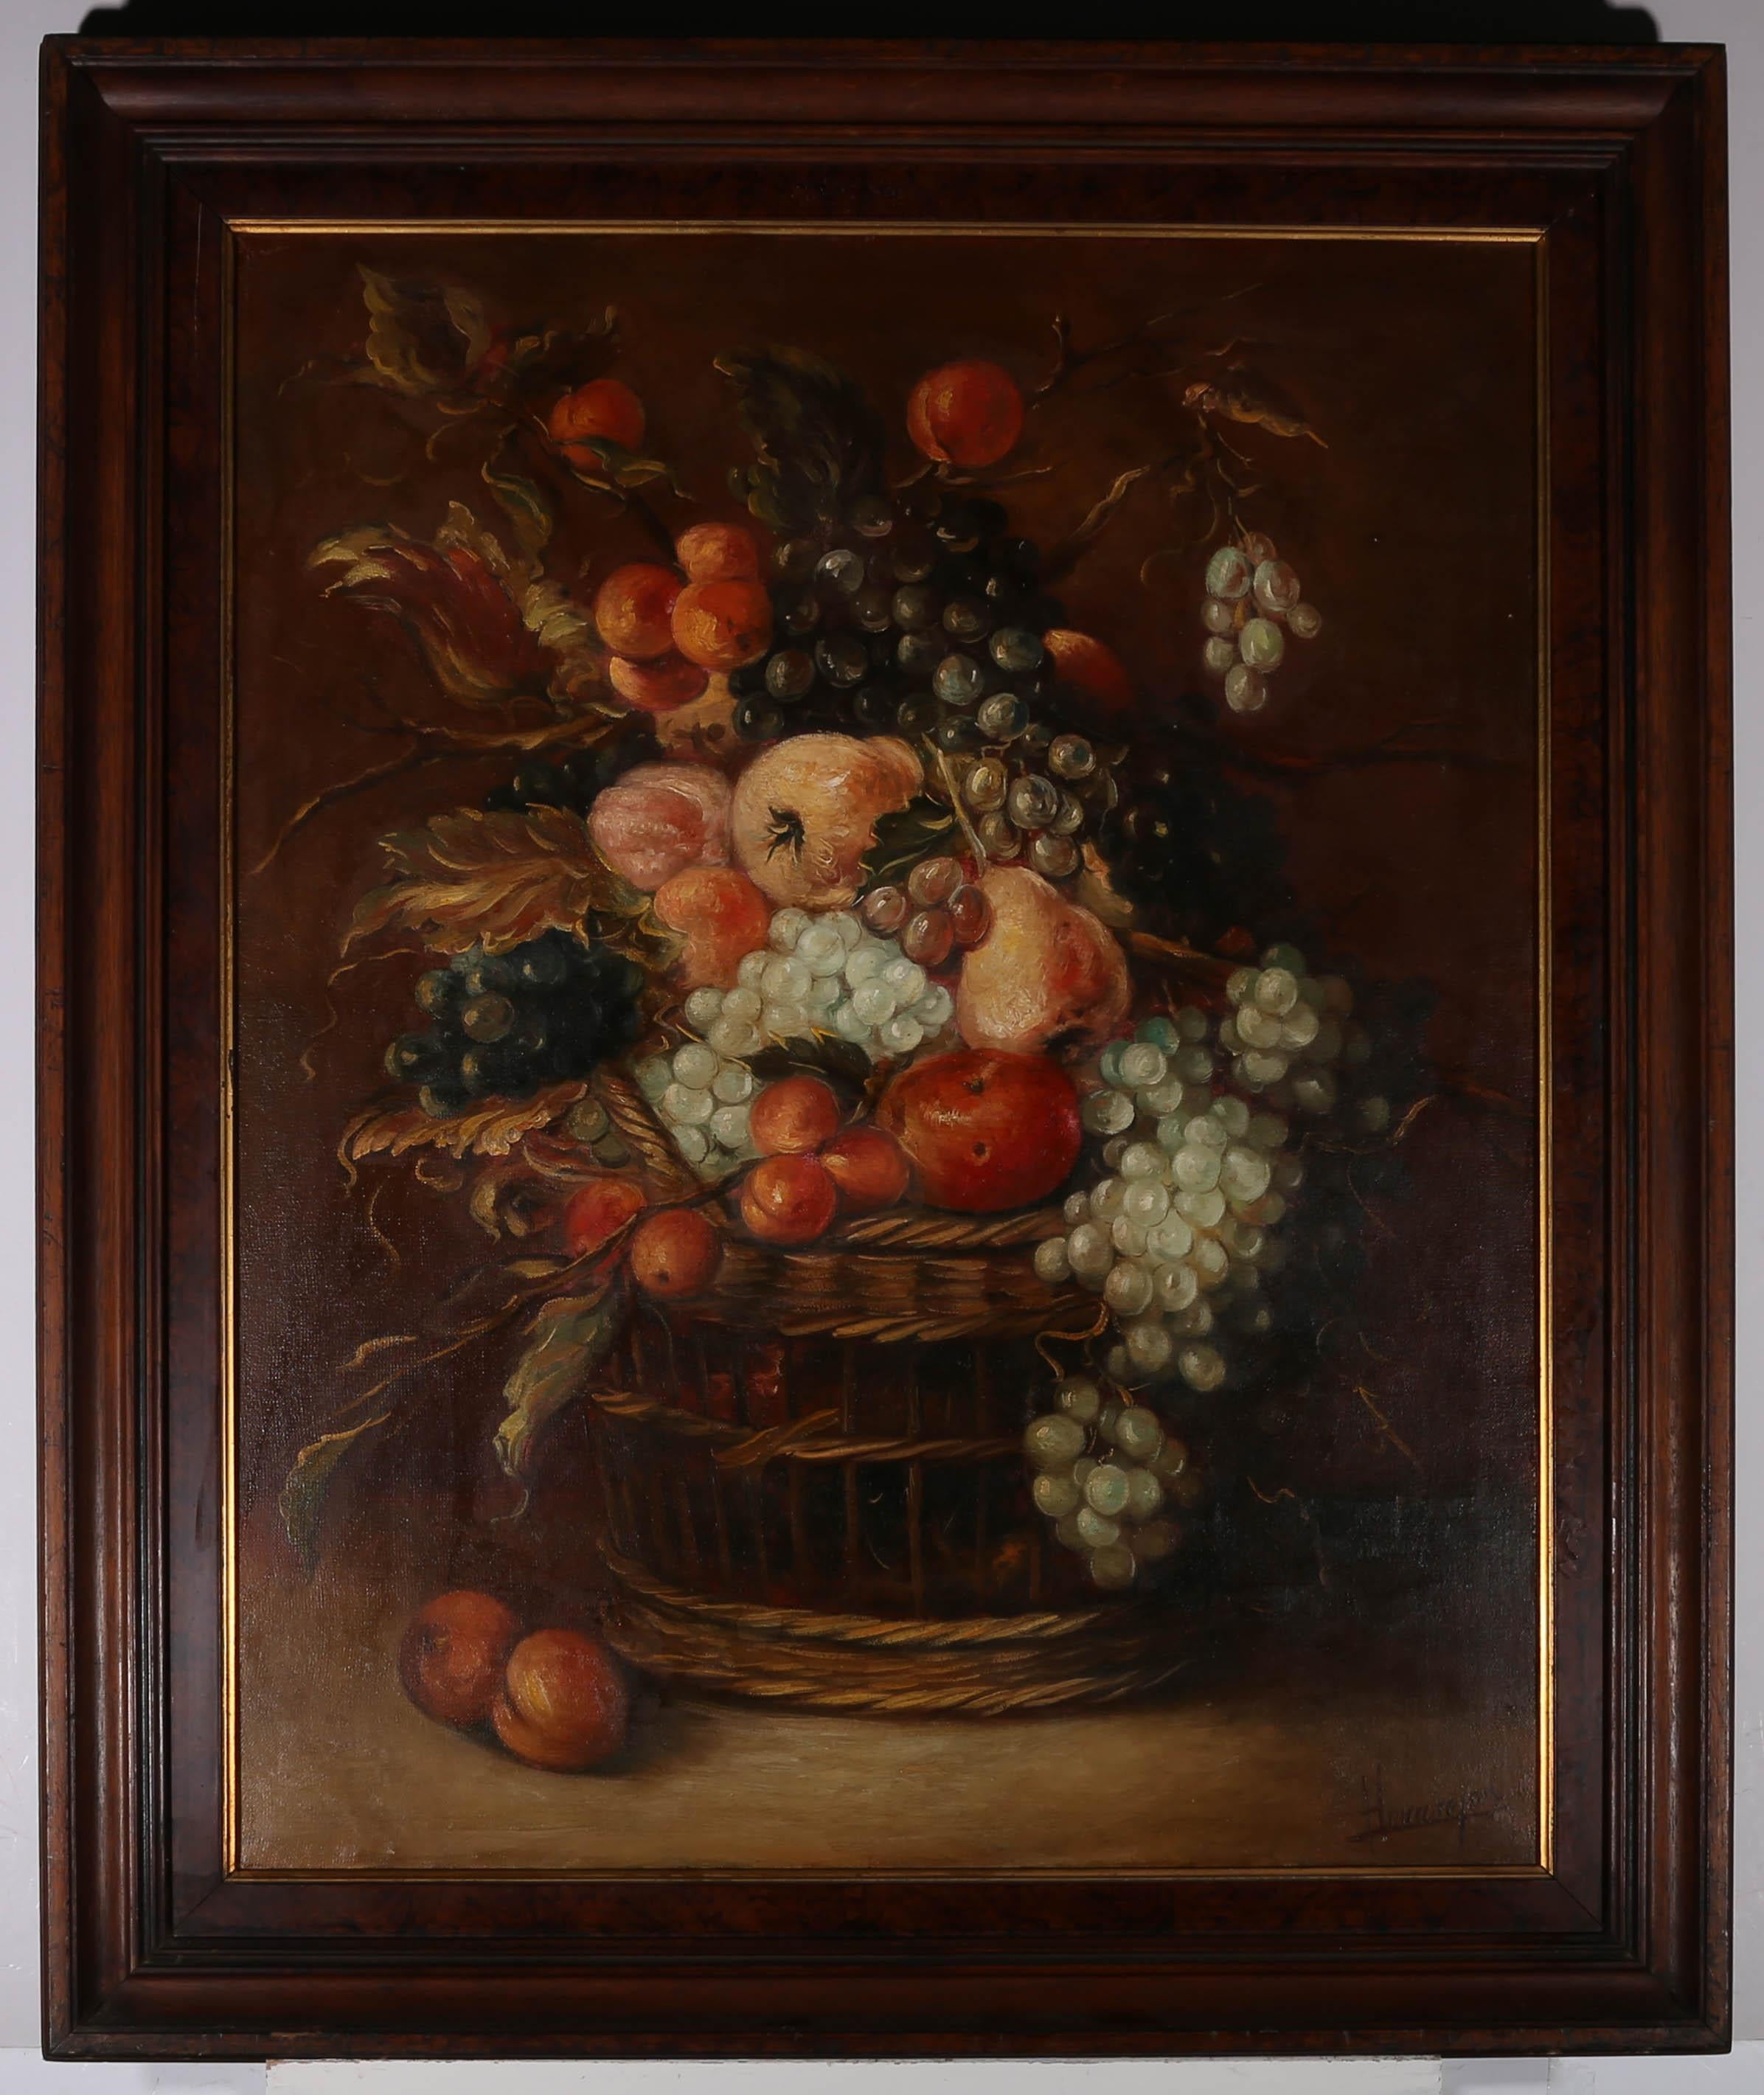 A striking mid Century oil still life showing a wicker basket overflowing with an abundance of juicy fruit, including pears, apricots, peaches and grapes. The artist has signed to the lower right corner and the painting has been presented in a